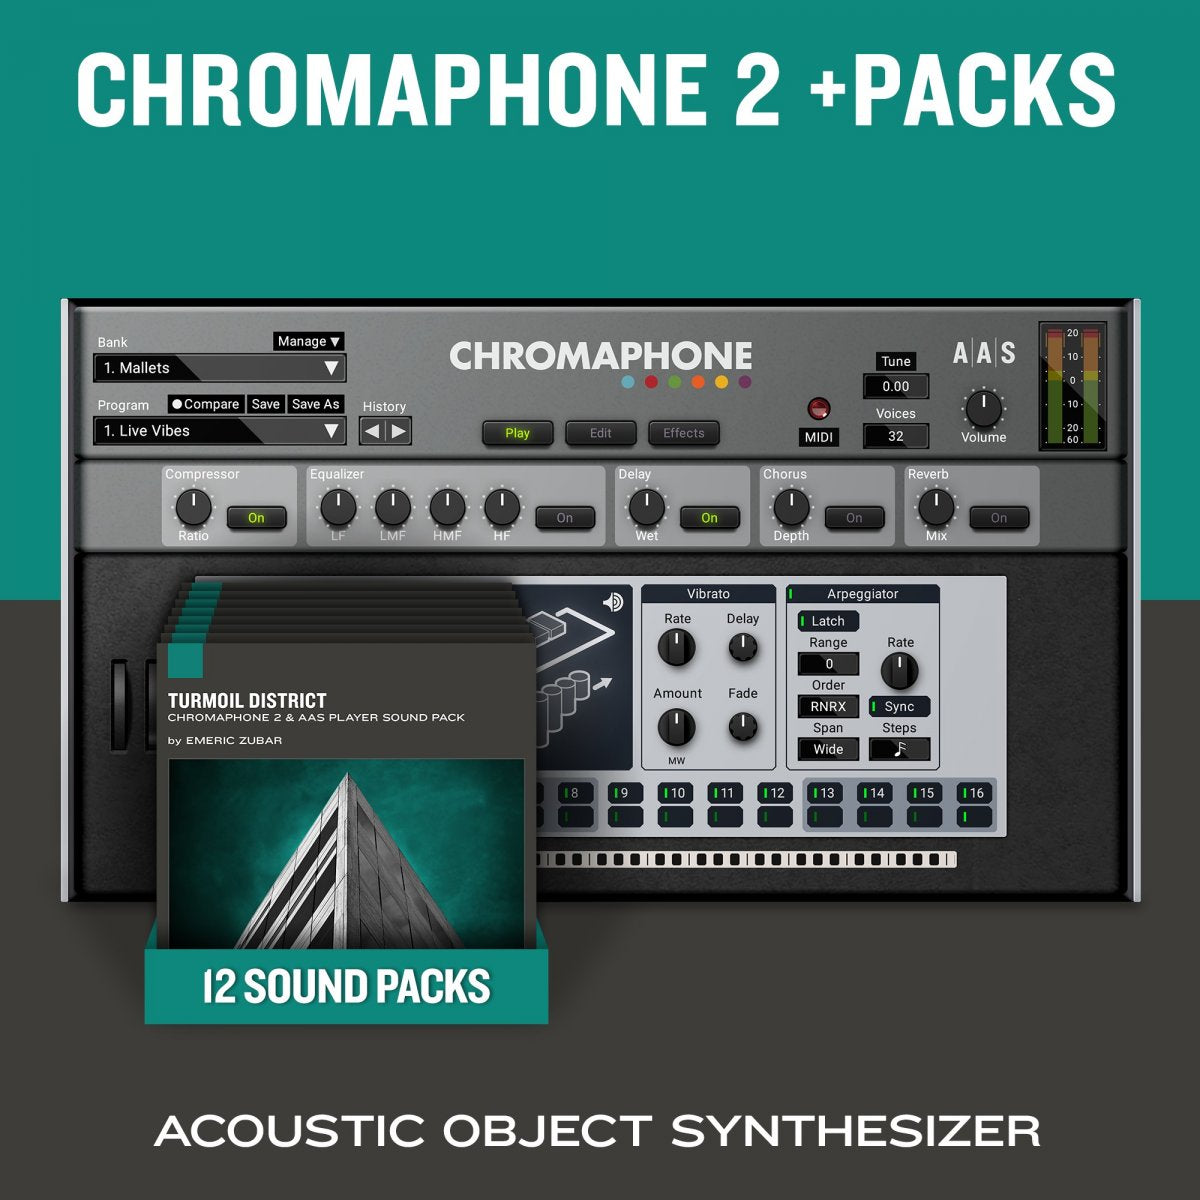 Applied Acoustics Systems Chromaphone 2 & Packs